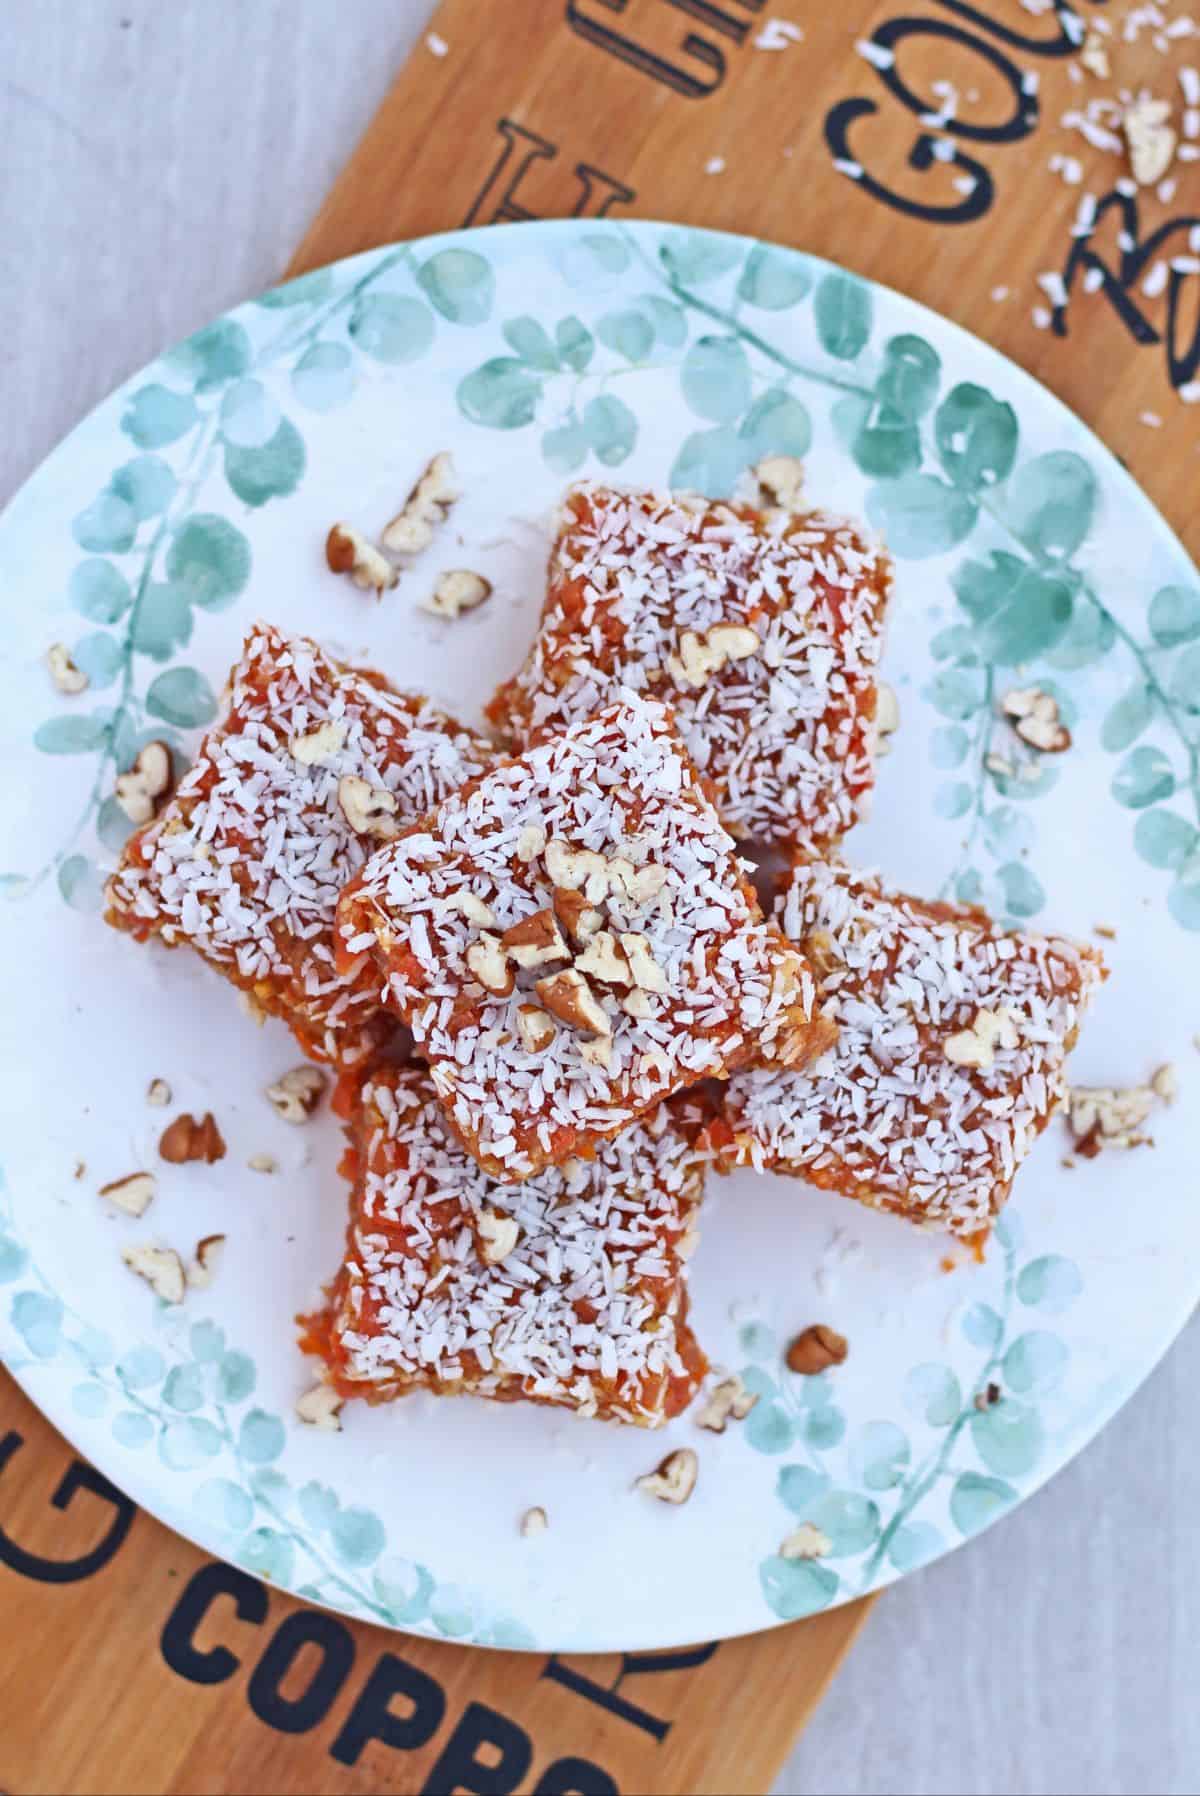 Carrot and walnut bars in a plate garnished with coconut and nuts